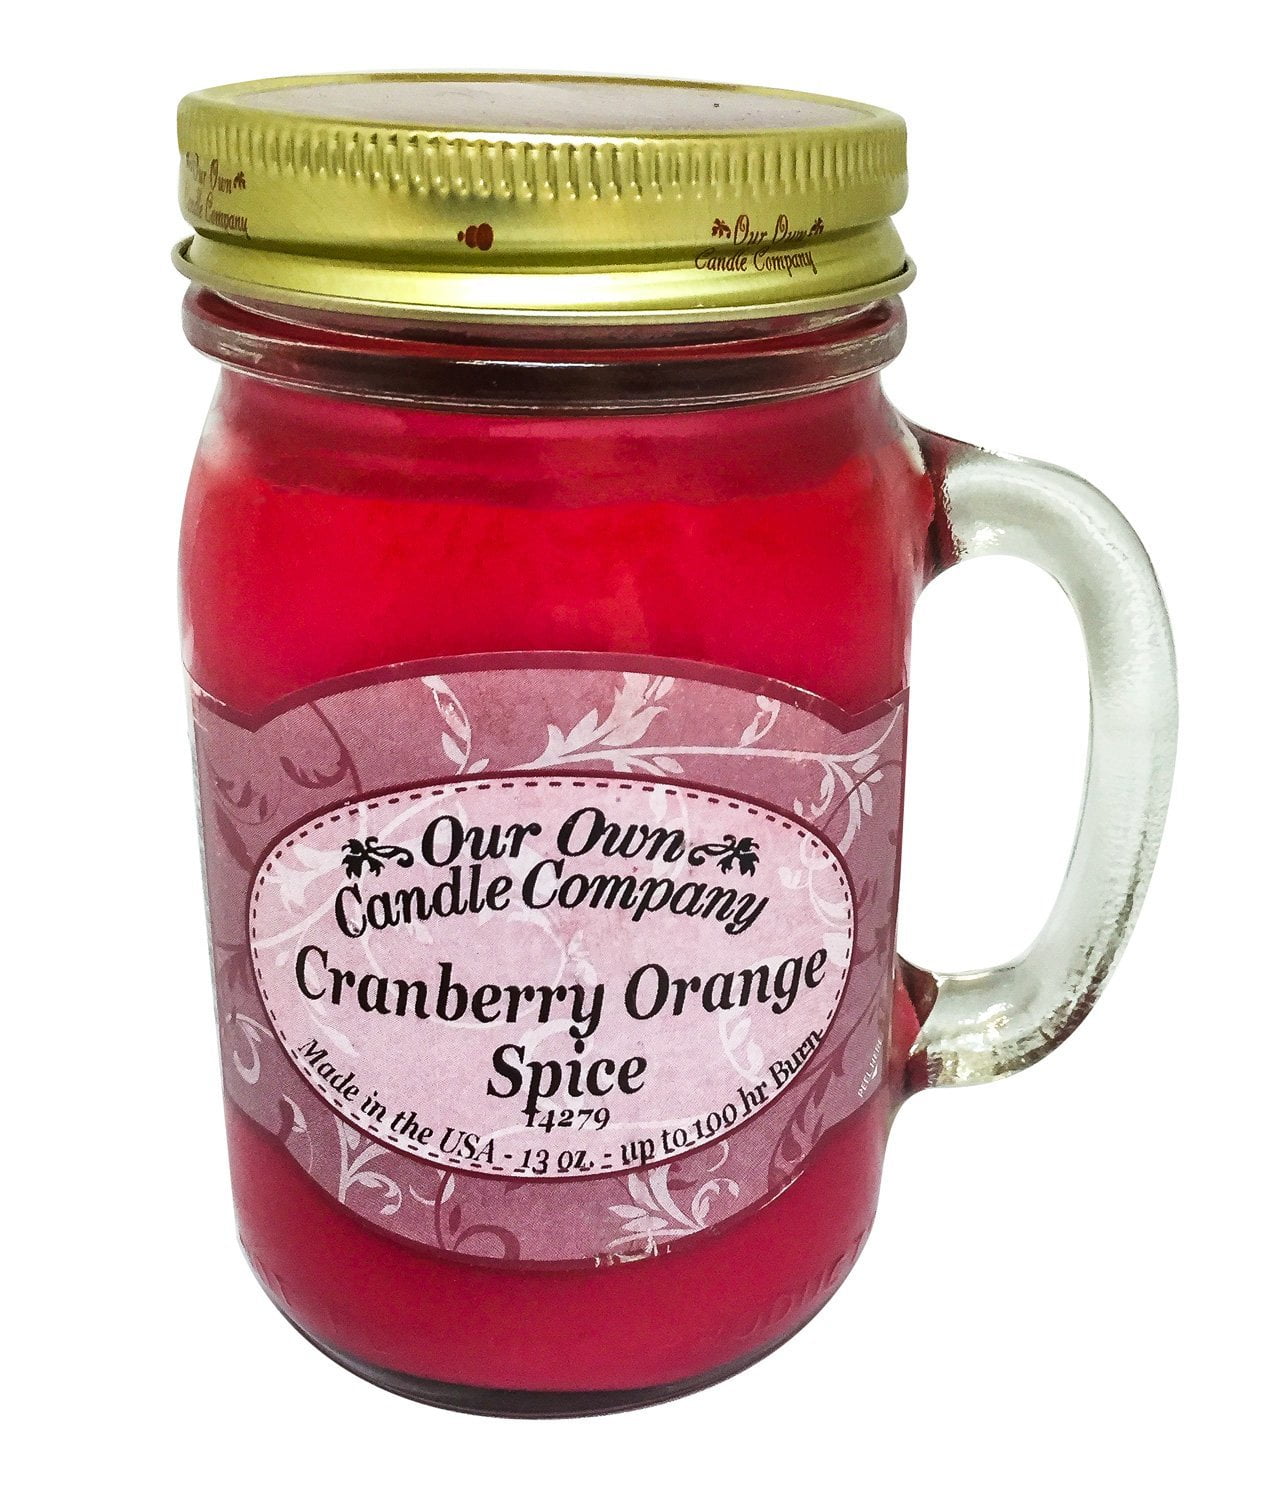 Cranberry Orange Spice Scented Candle 13 oz Mason Jar by Our Own Candle Company 